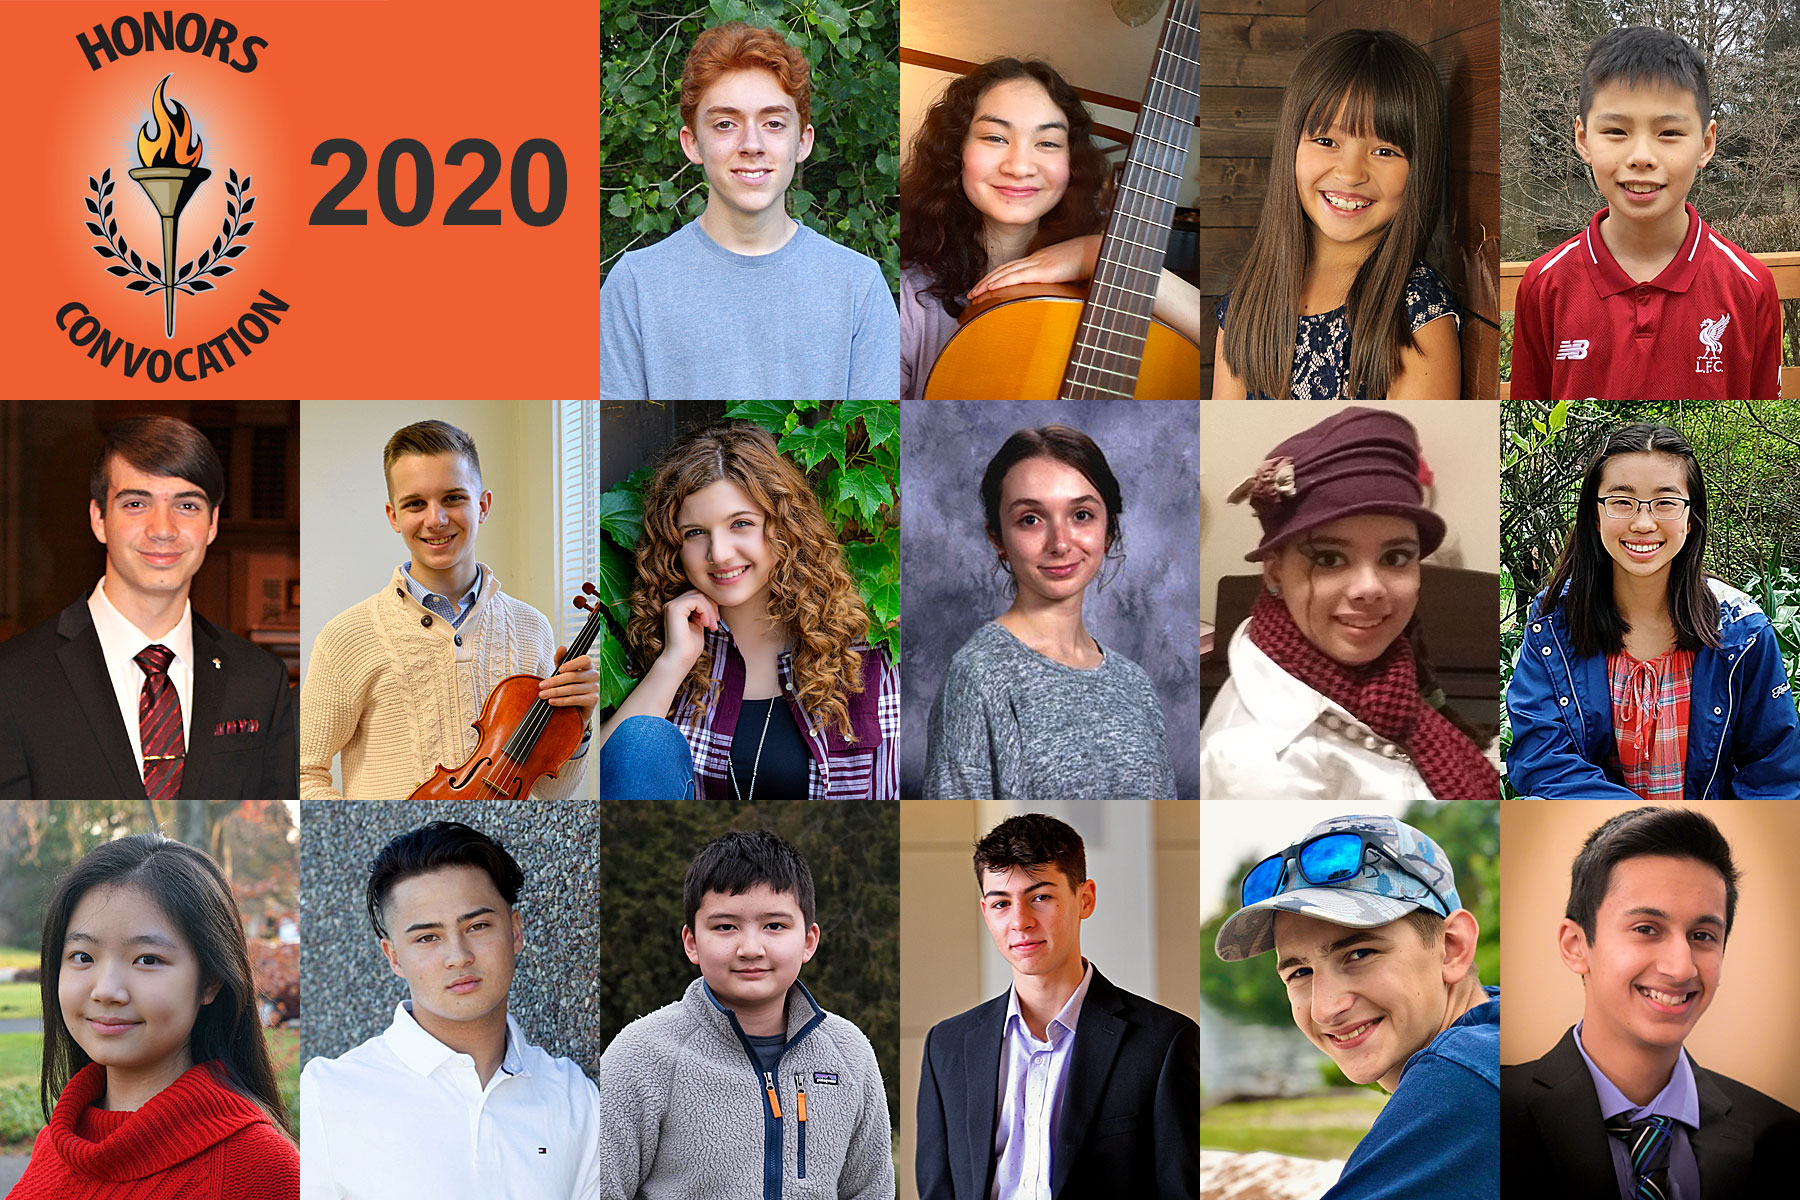 2020 Honors Convocation features 16 talented Hochstein students 